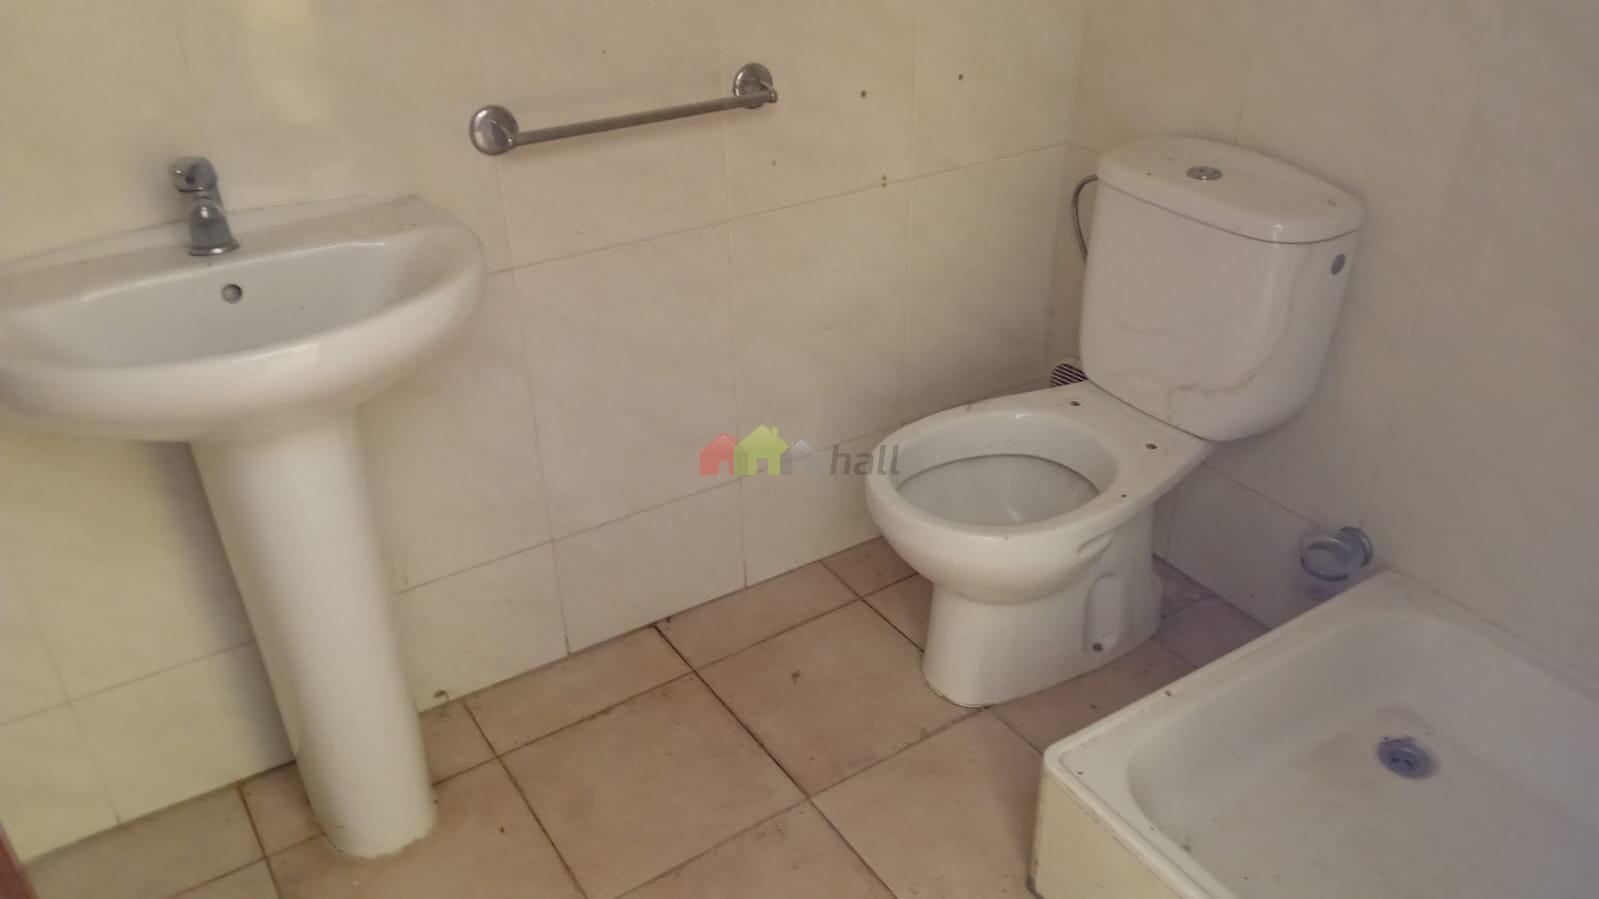 WC 2 Piso 0